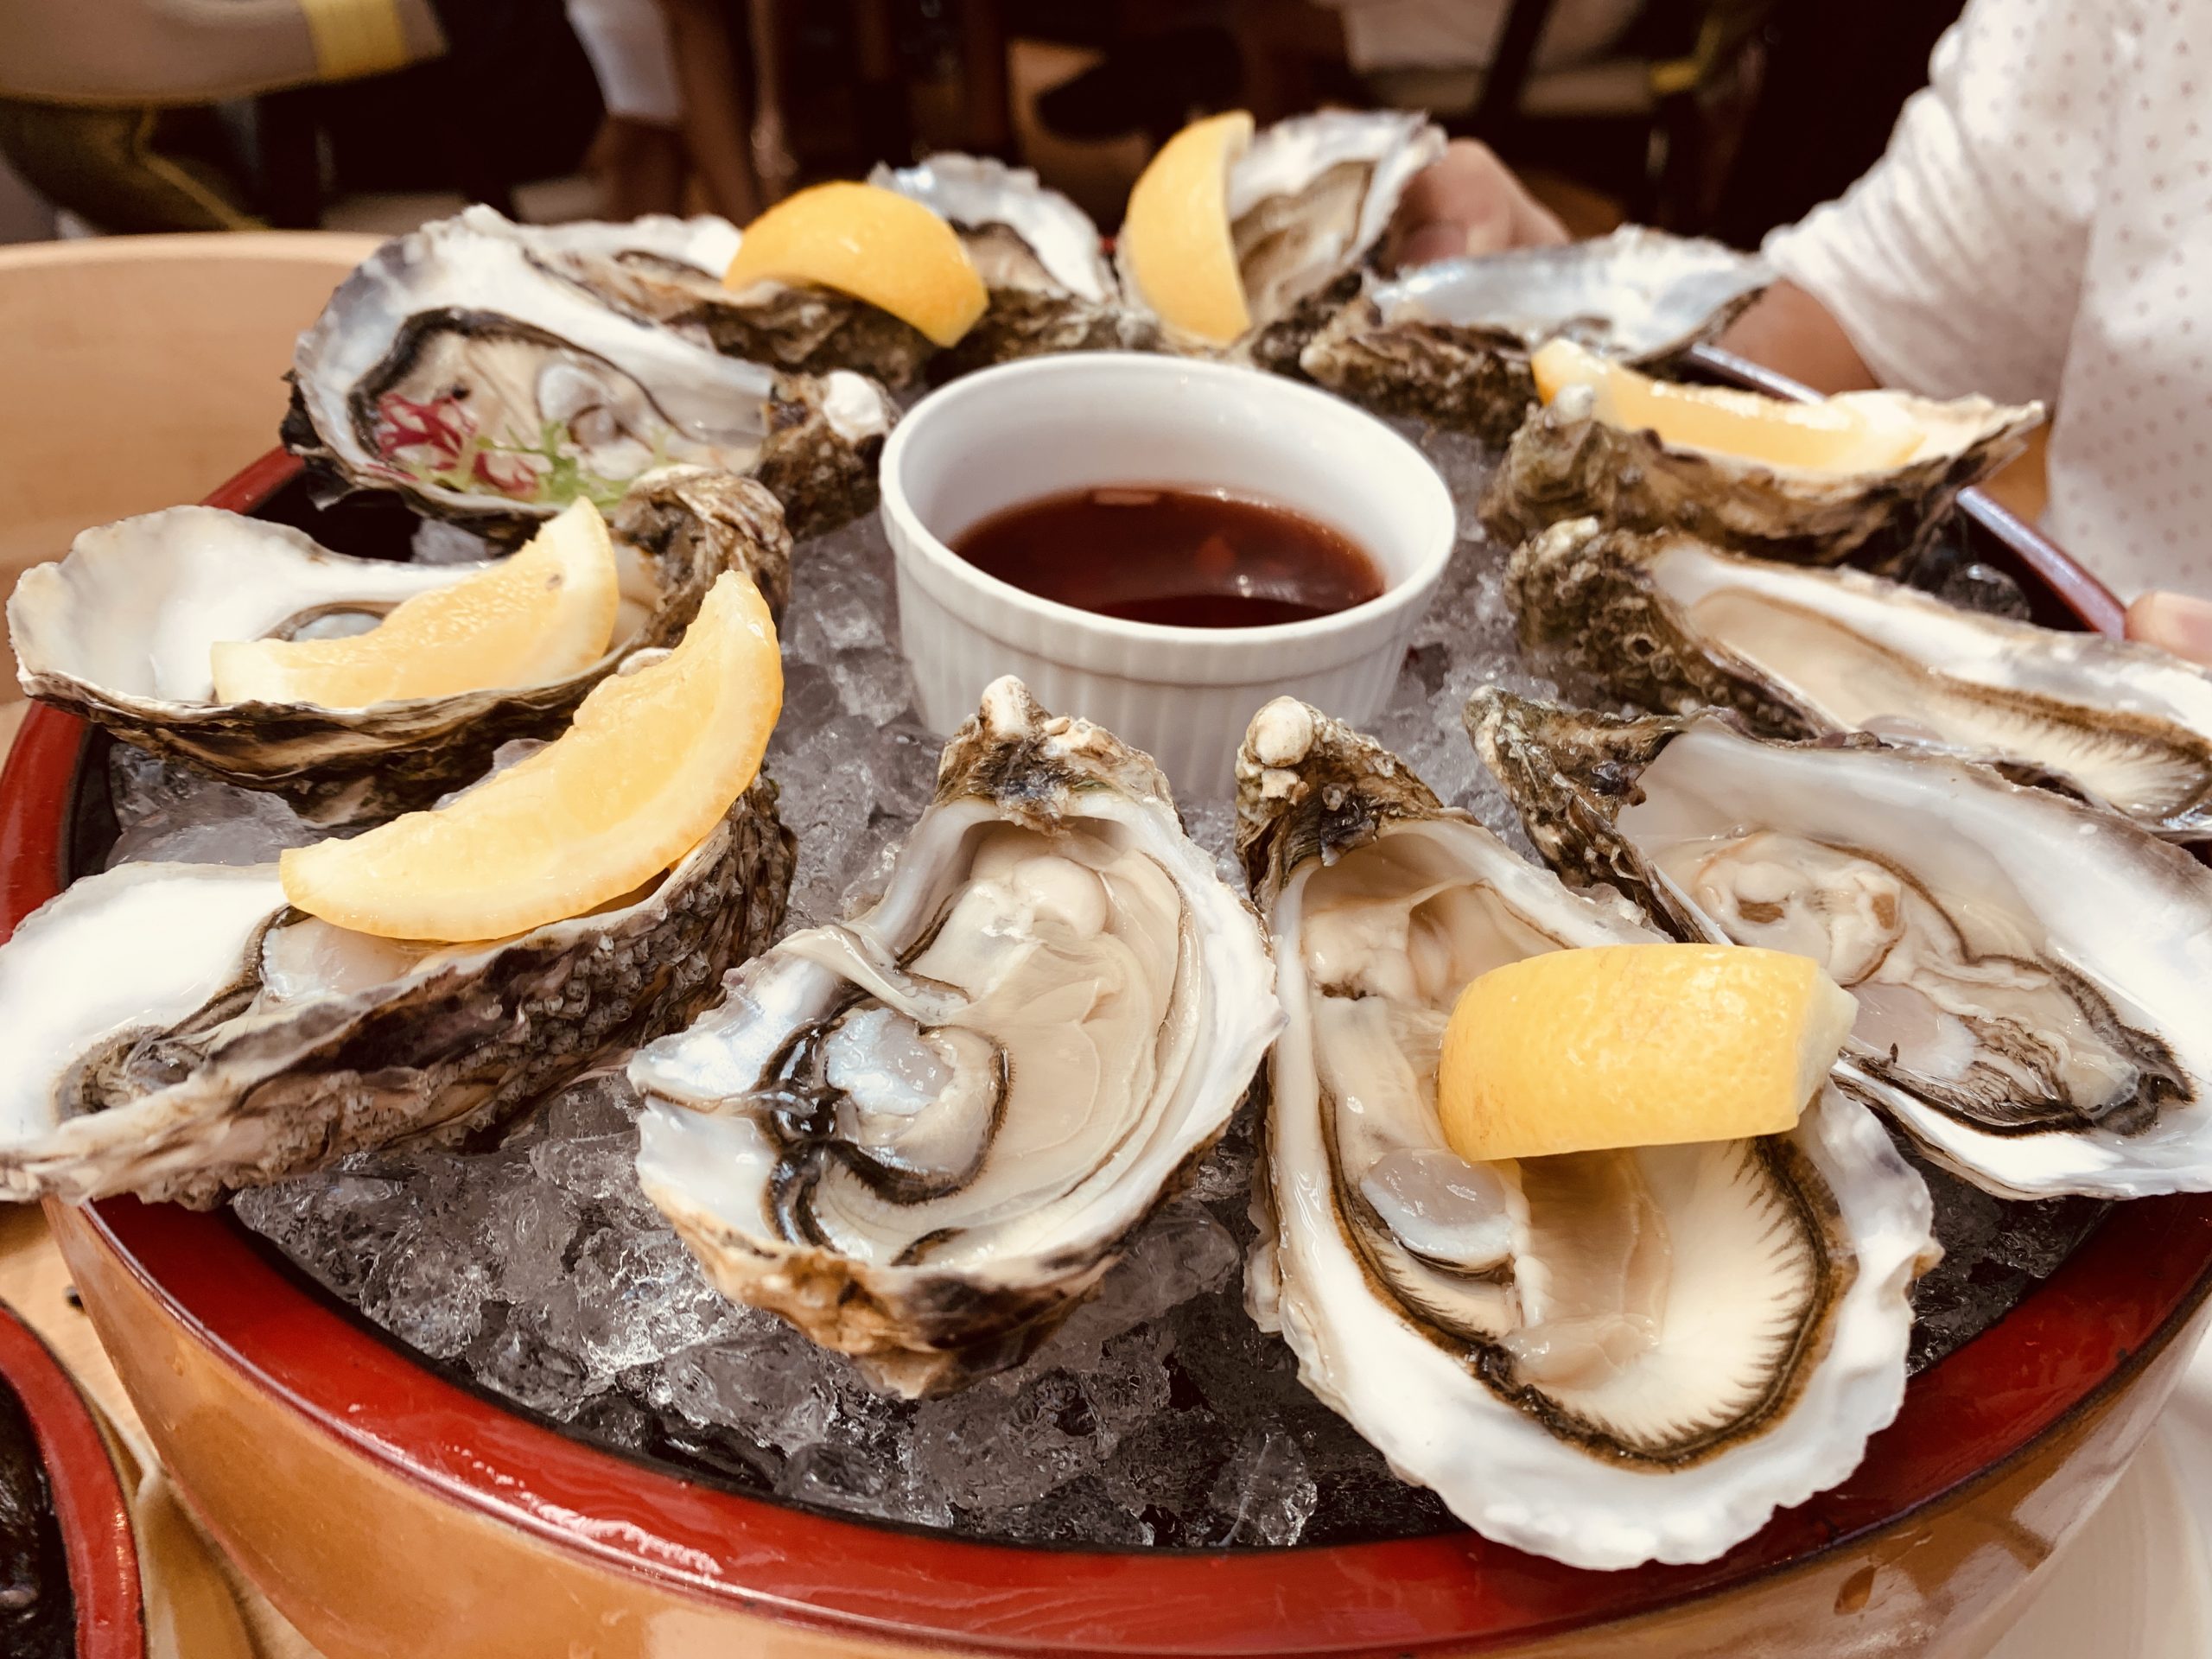 Rise Restaurant - Fresh Oysters with Mignonette Sauce